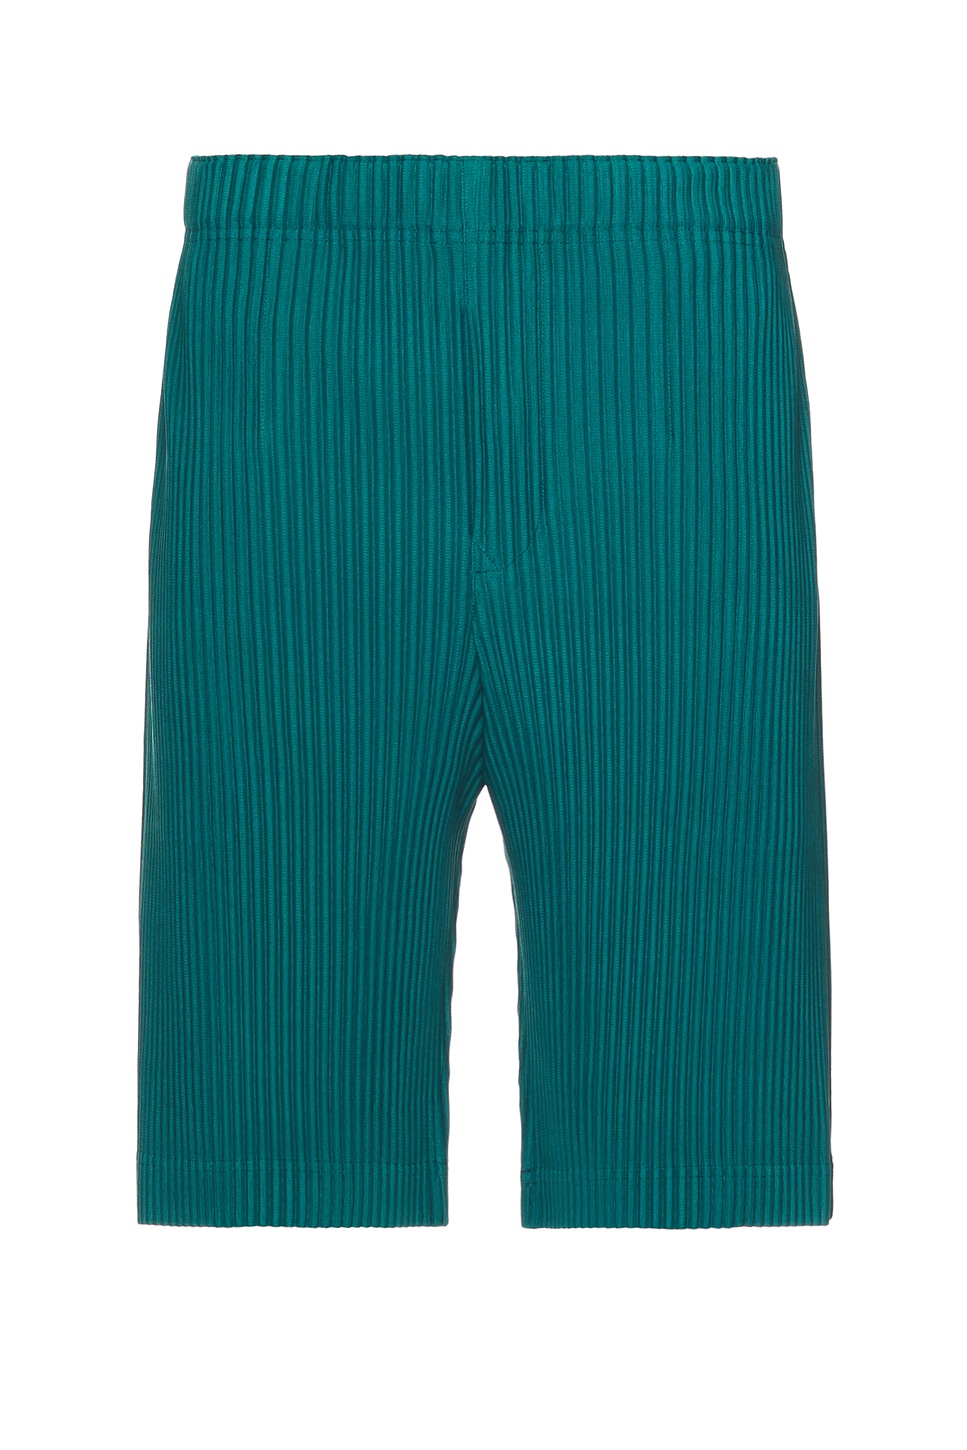 Issey Miyake Pleated Shorts In Teal Green